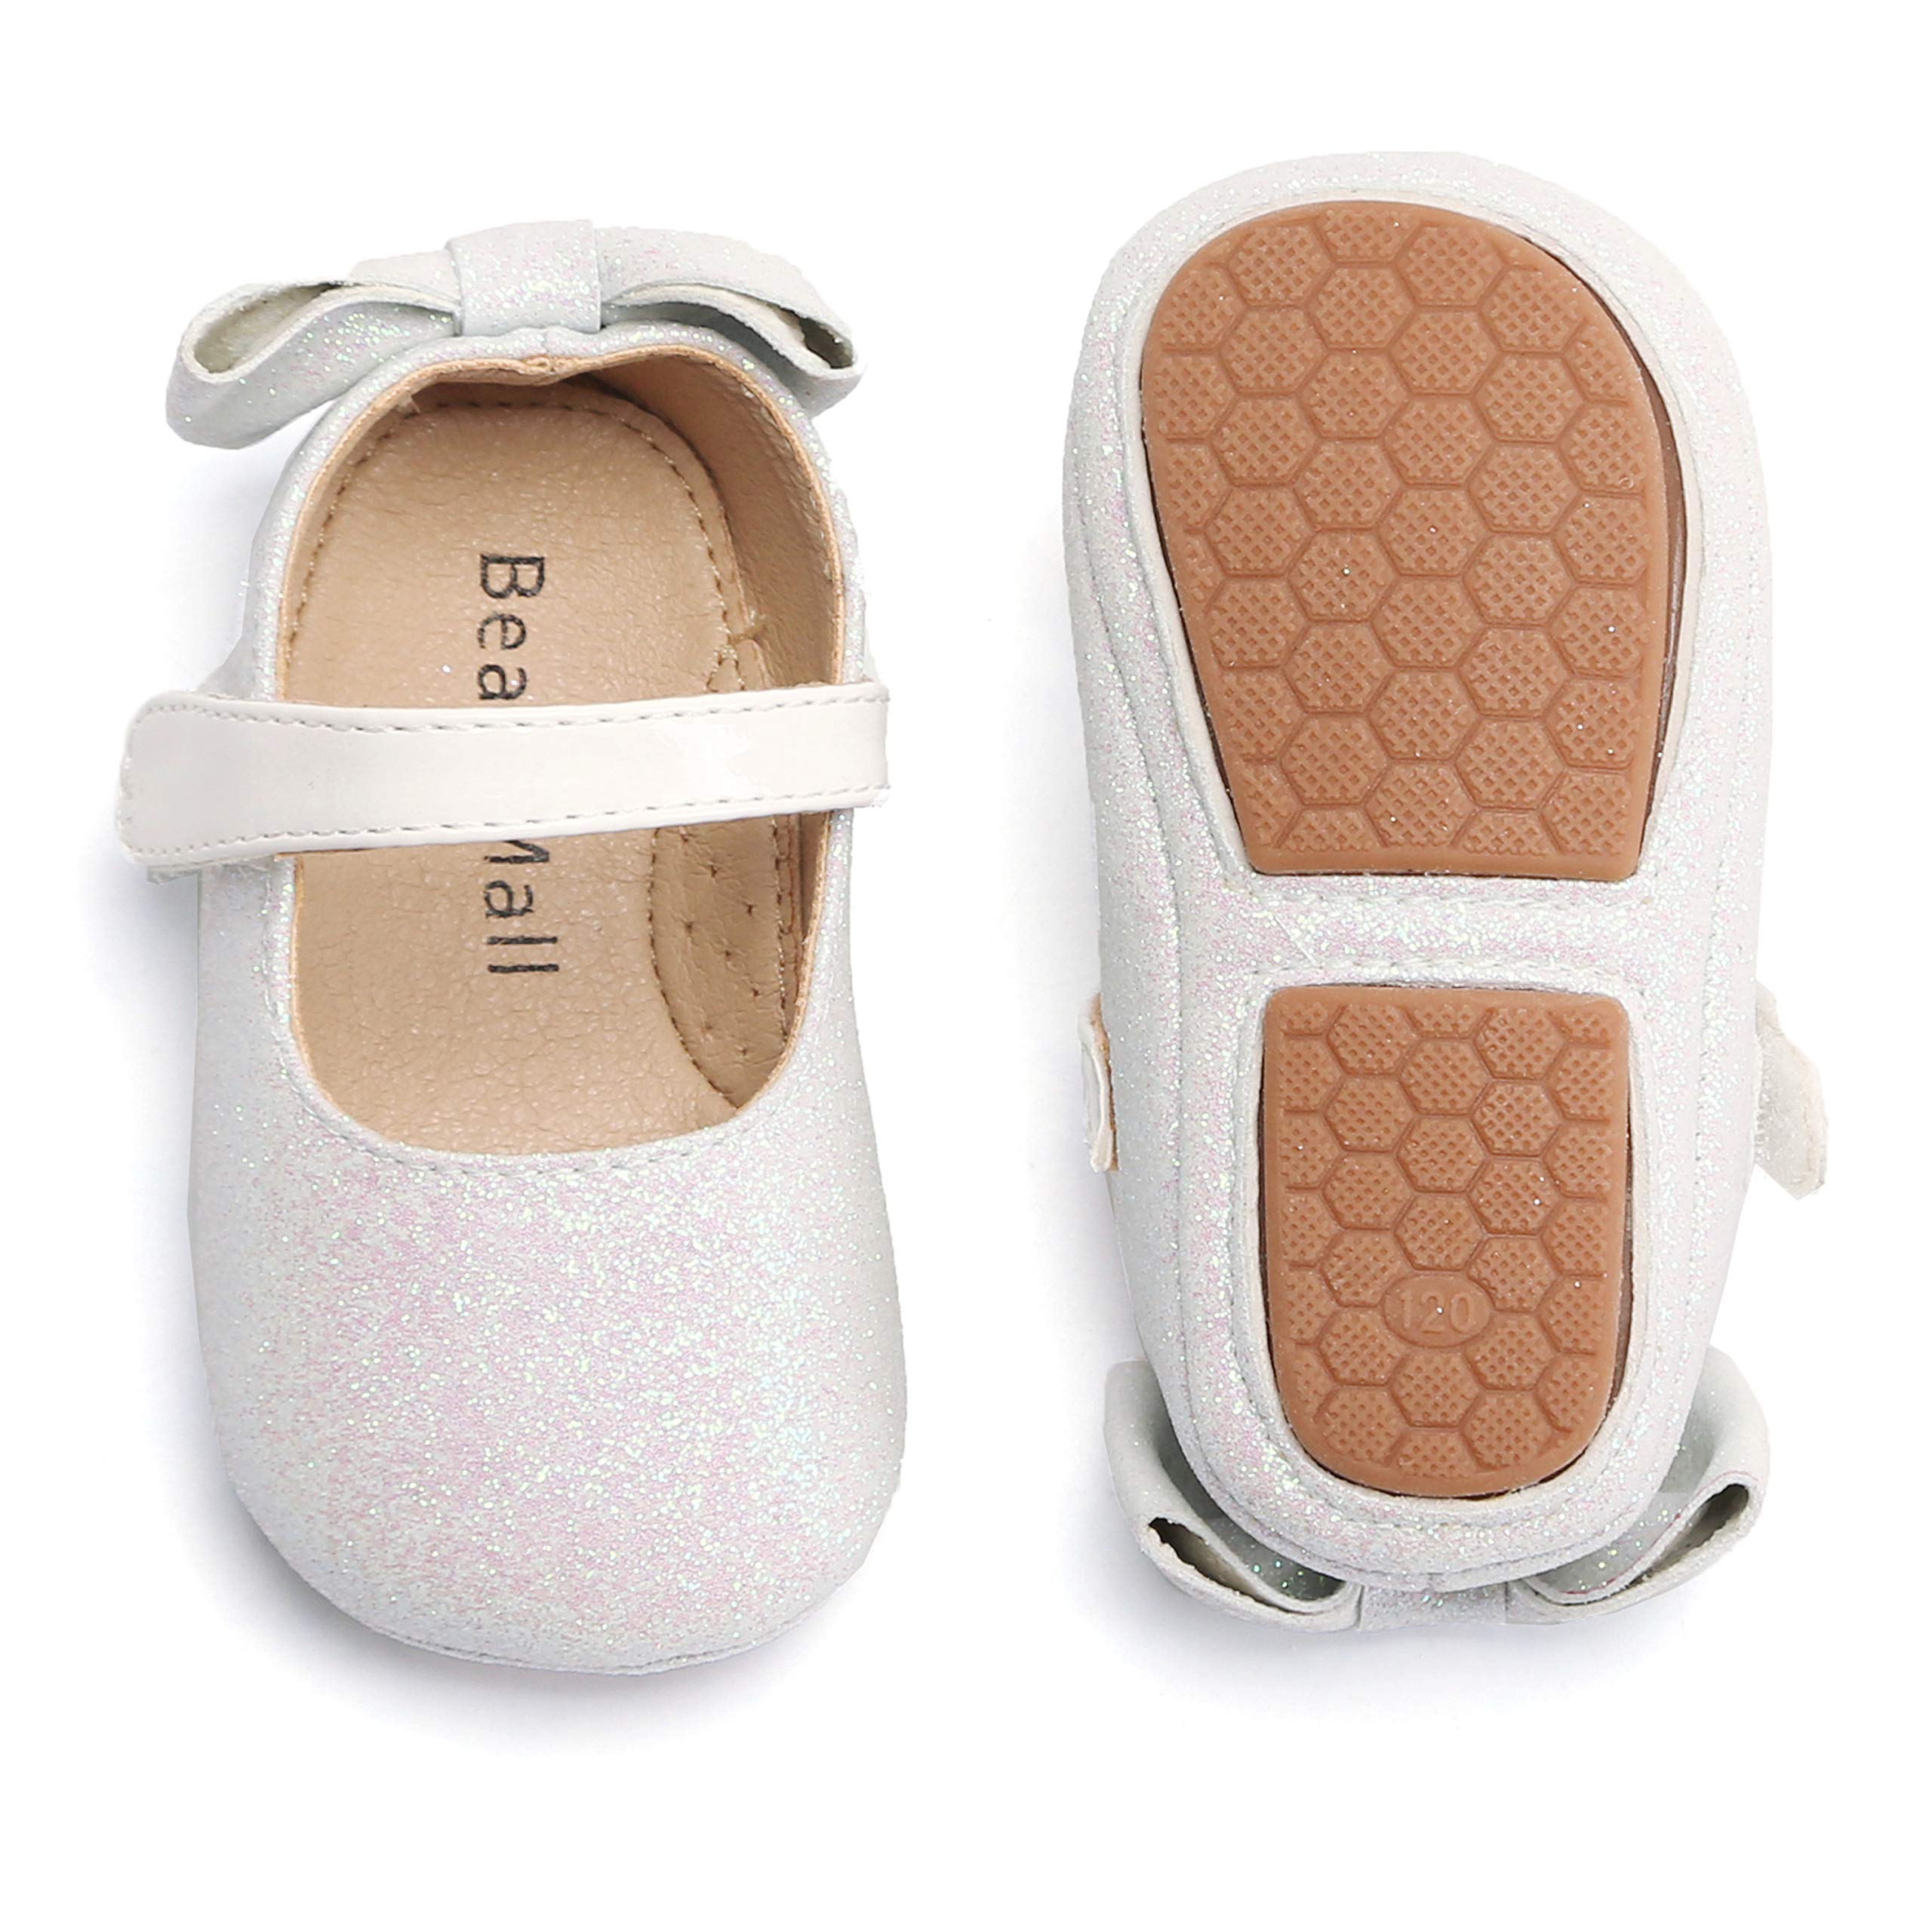 Soft Sole Baby Shoes - Infant Baby Walking Shoes Moccasins Rubber Sole Crib Shoes